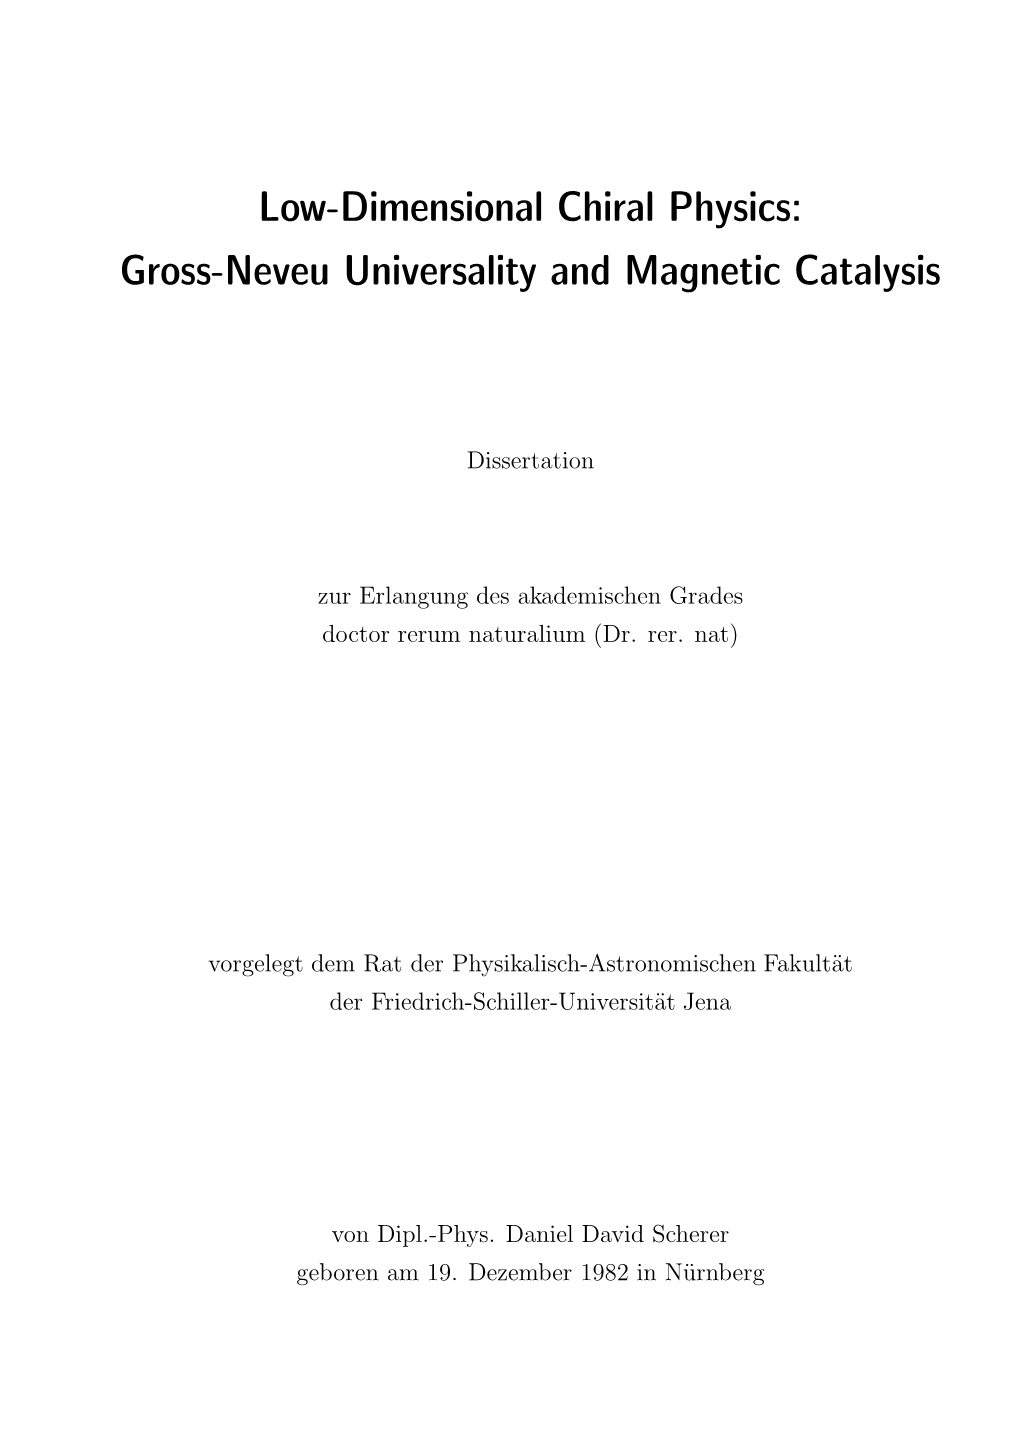 Low-Dimensional Chiral Physics: Gross-Neveu Universality and Magnetic Catalysis